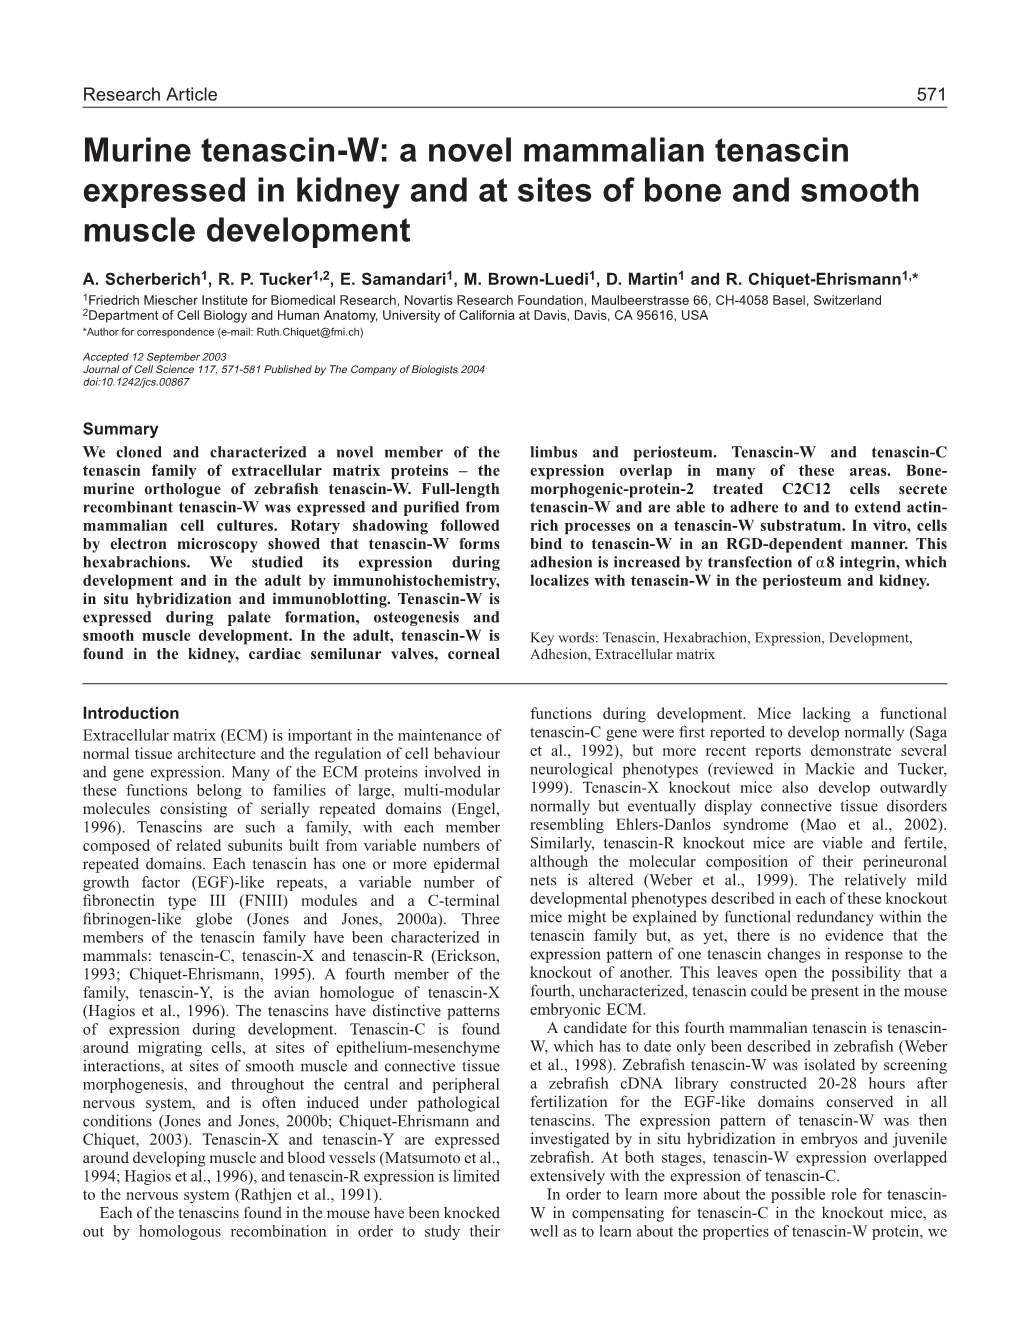 Murine Tenascin-W: a Novel Mammalian Tenascin Expressed in Kidney and at Sites of Bone and Smooth Muscle Development